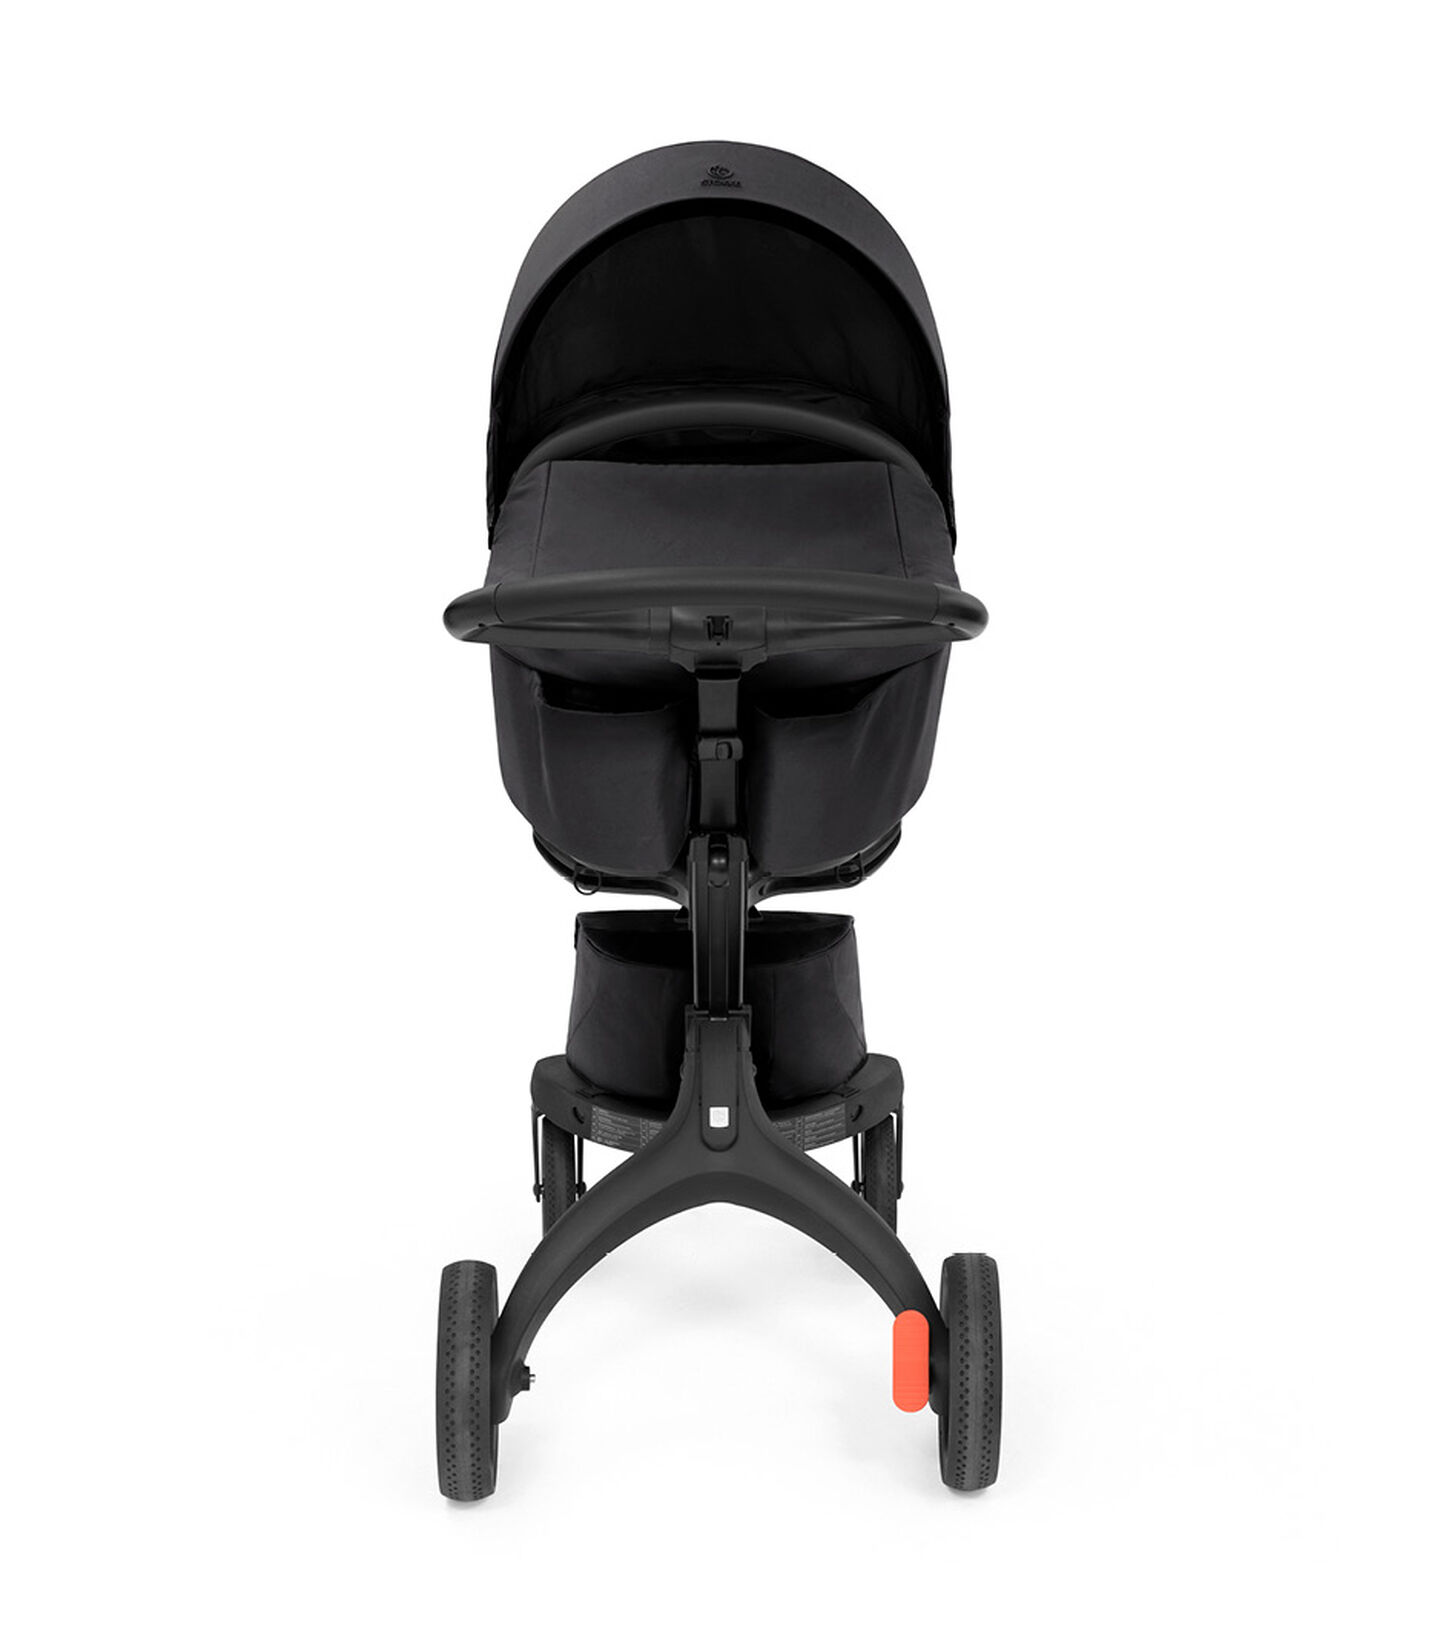 Stokke® Xplory® X Carry Cot Rich Black, 深黑色, mainview view 3